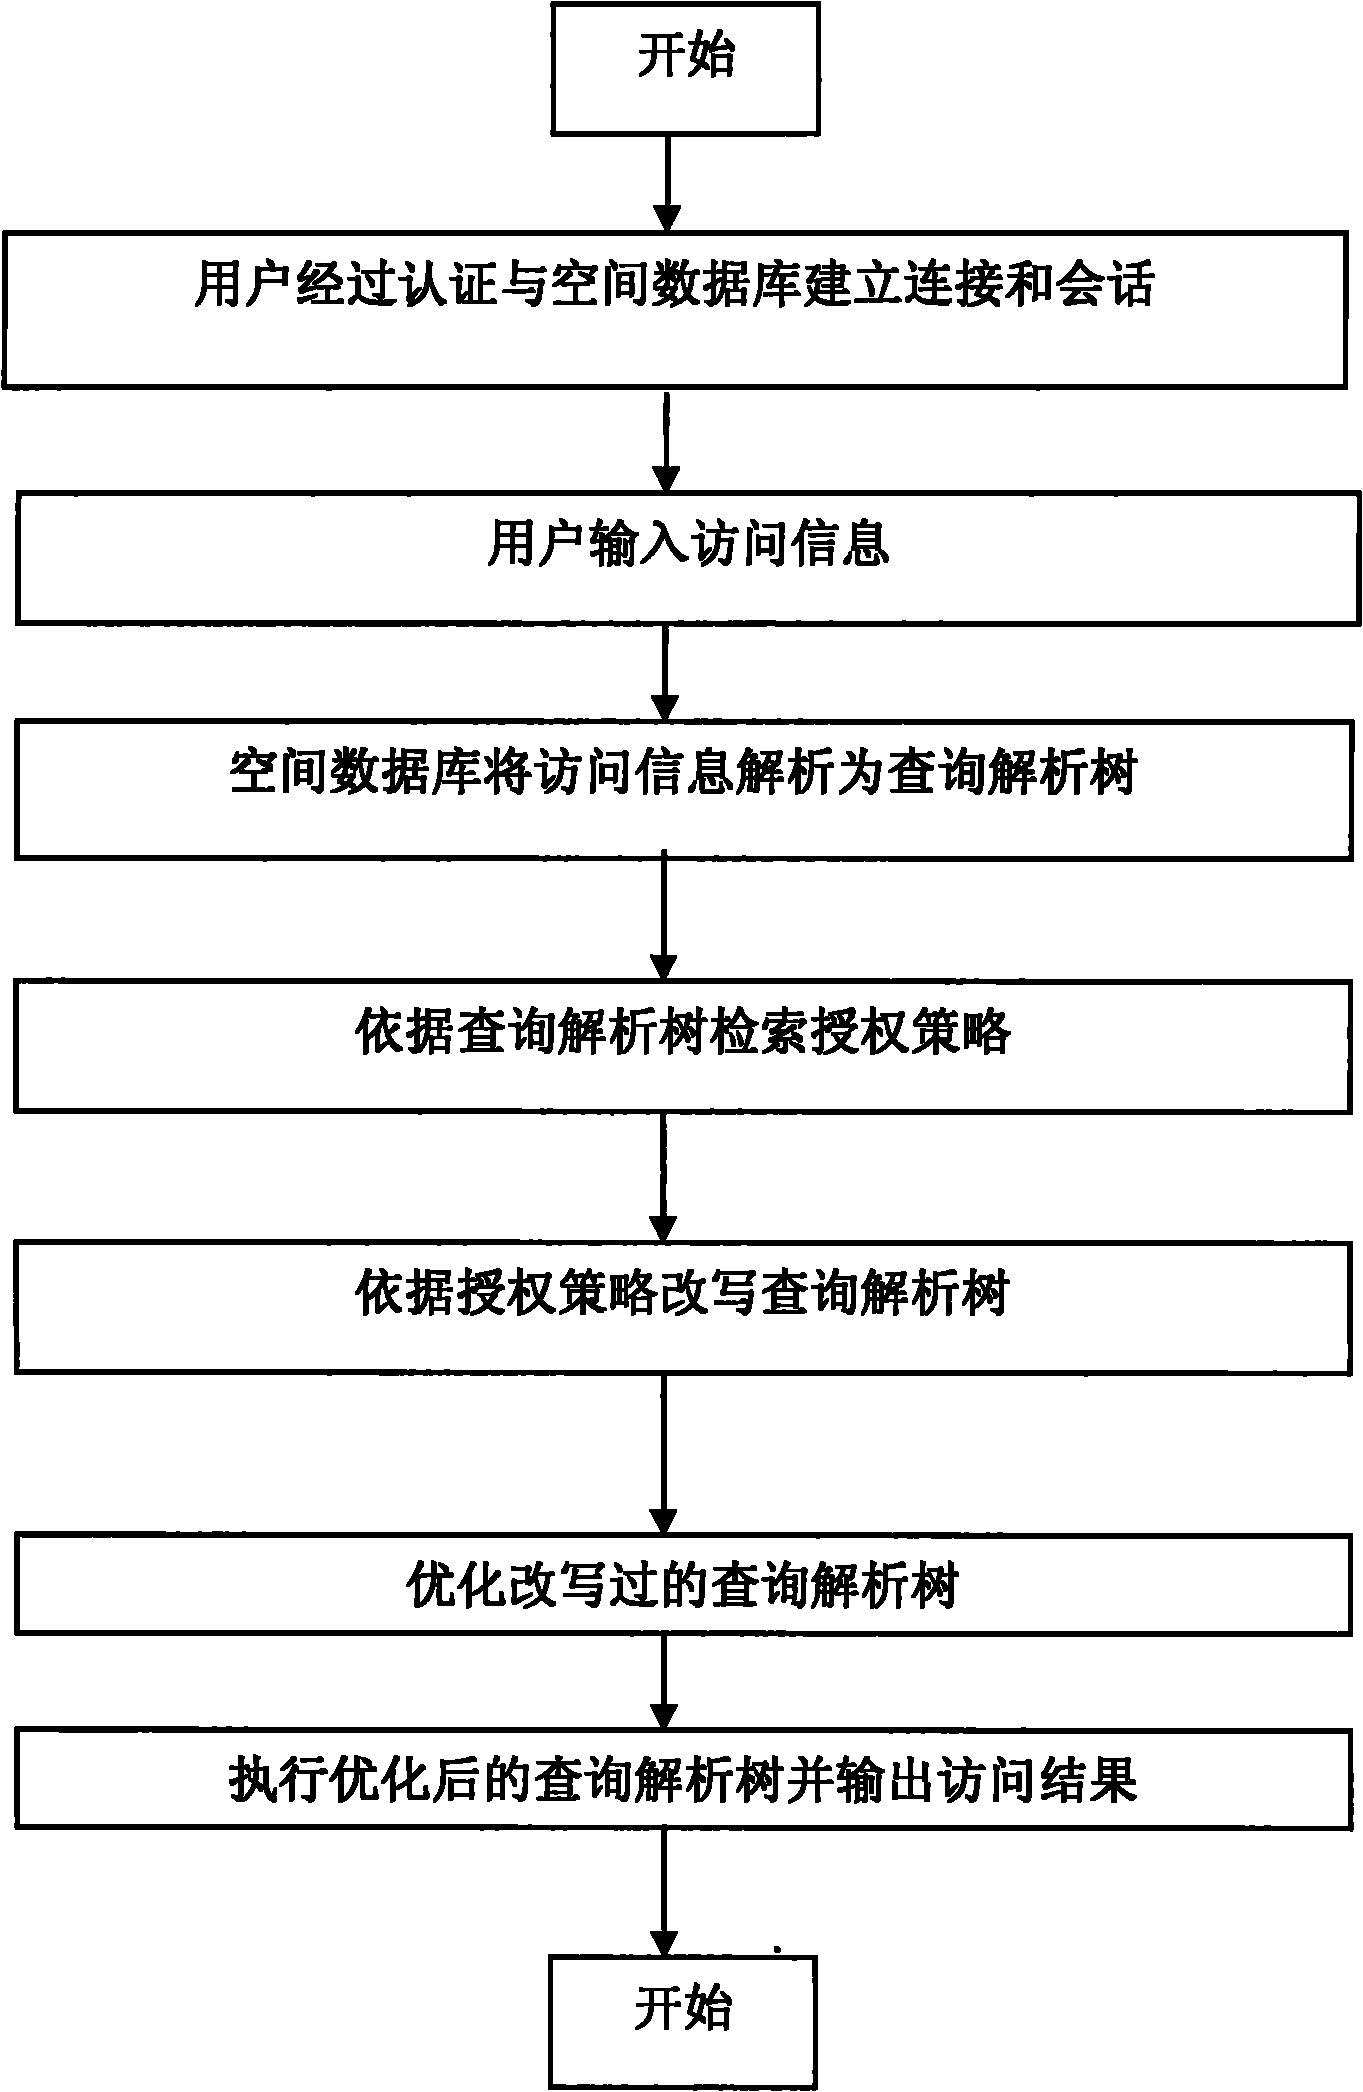 Access control method for spatial database